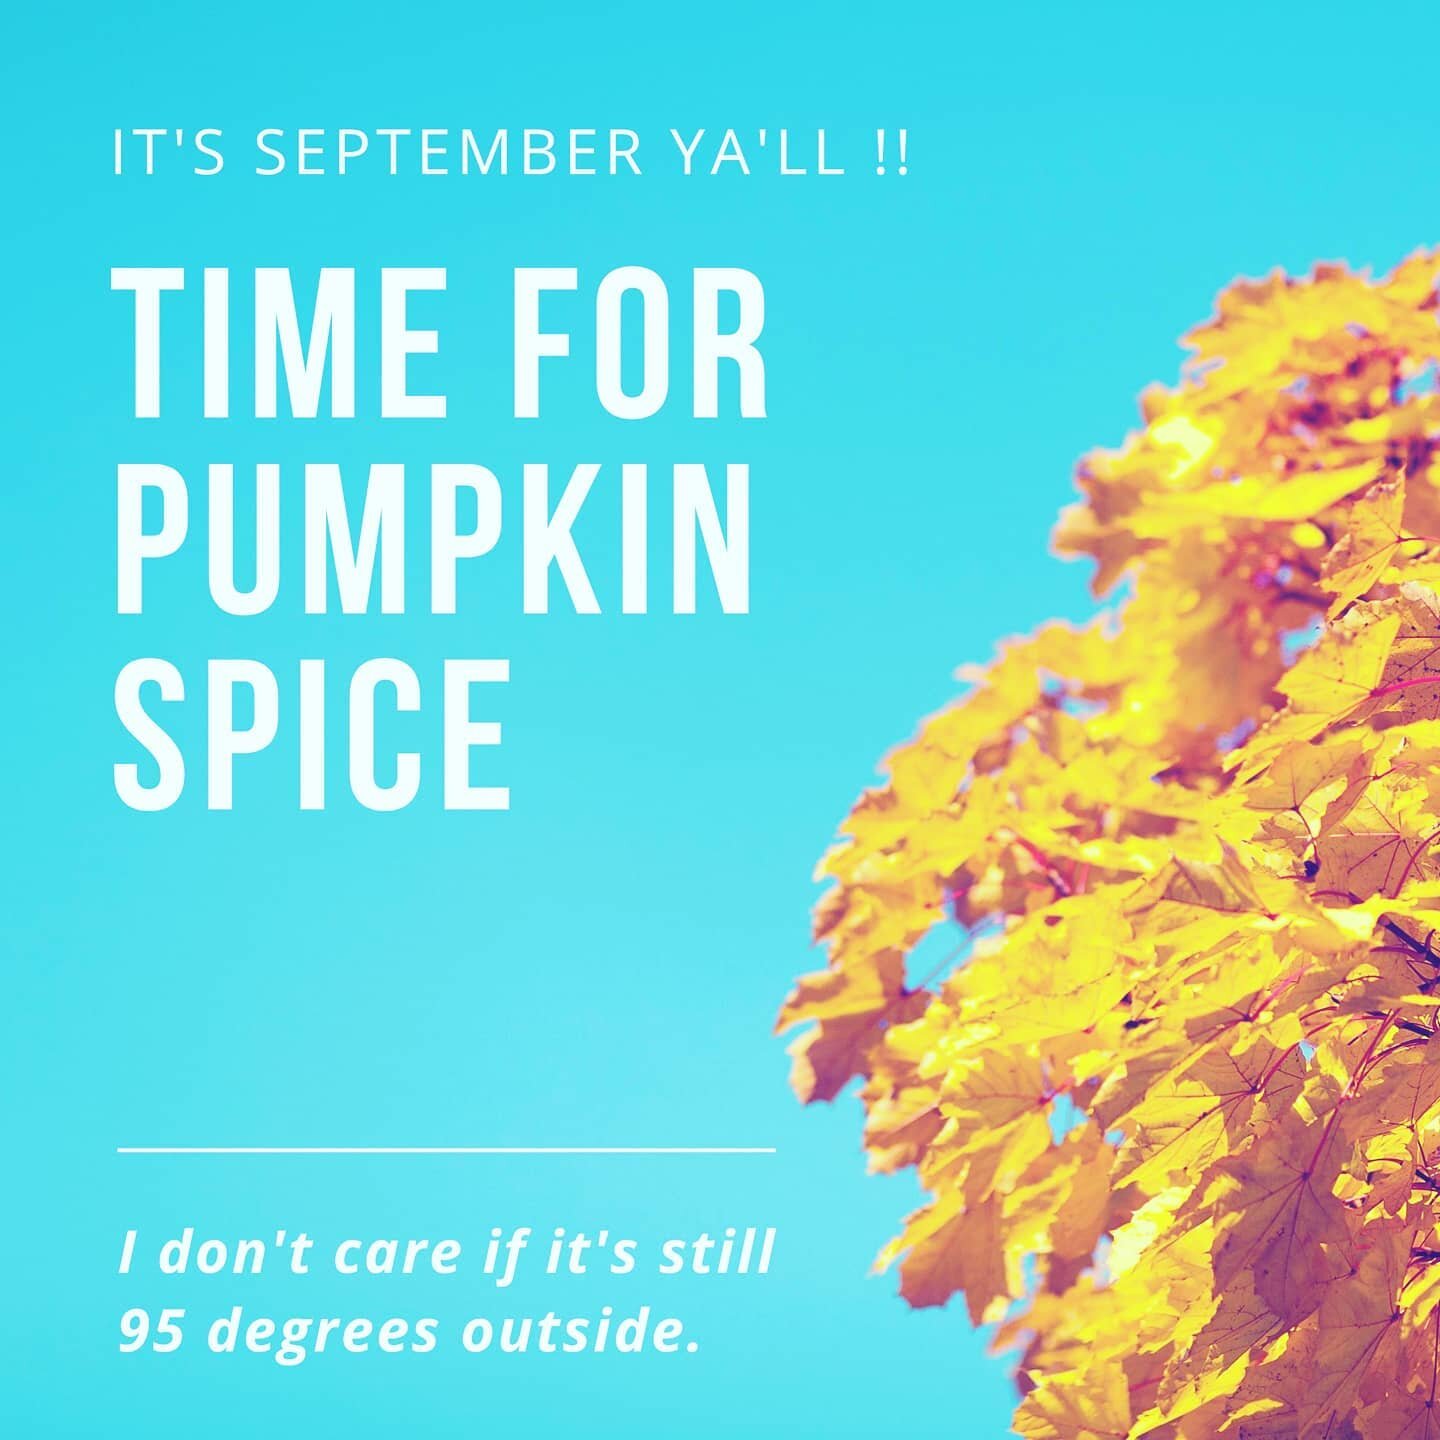 🤠 It's been 90+ degrees here in Texas the last few days. But I don't care IT'S  FALL YA'LL!! 🍂

🍁 Fall is my favorite season. I feel like it's a perfect time to start planning &amp; doing new things, nature gets a break from the heat, and the best